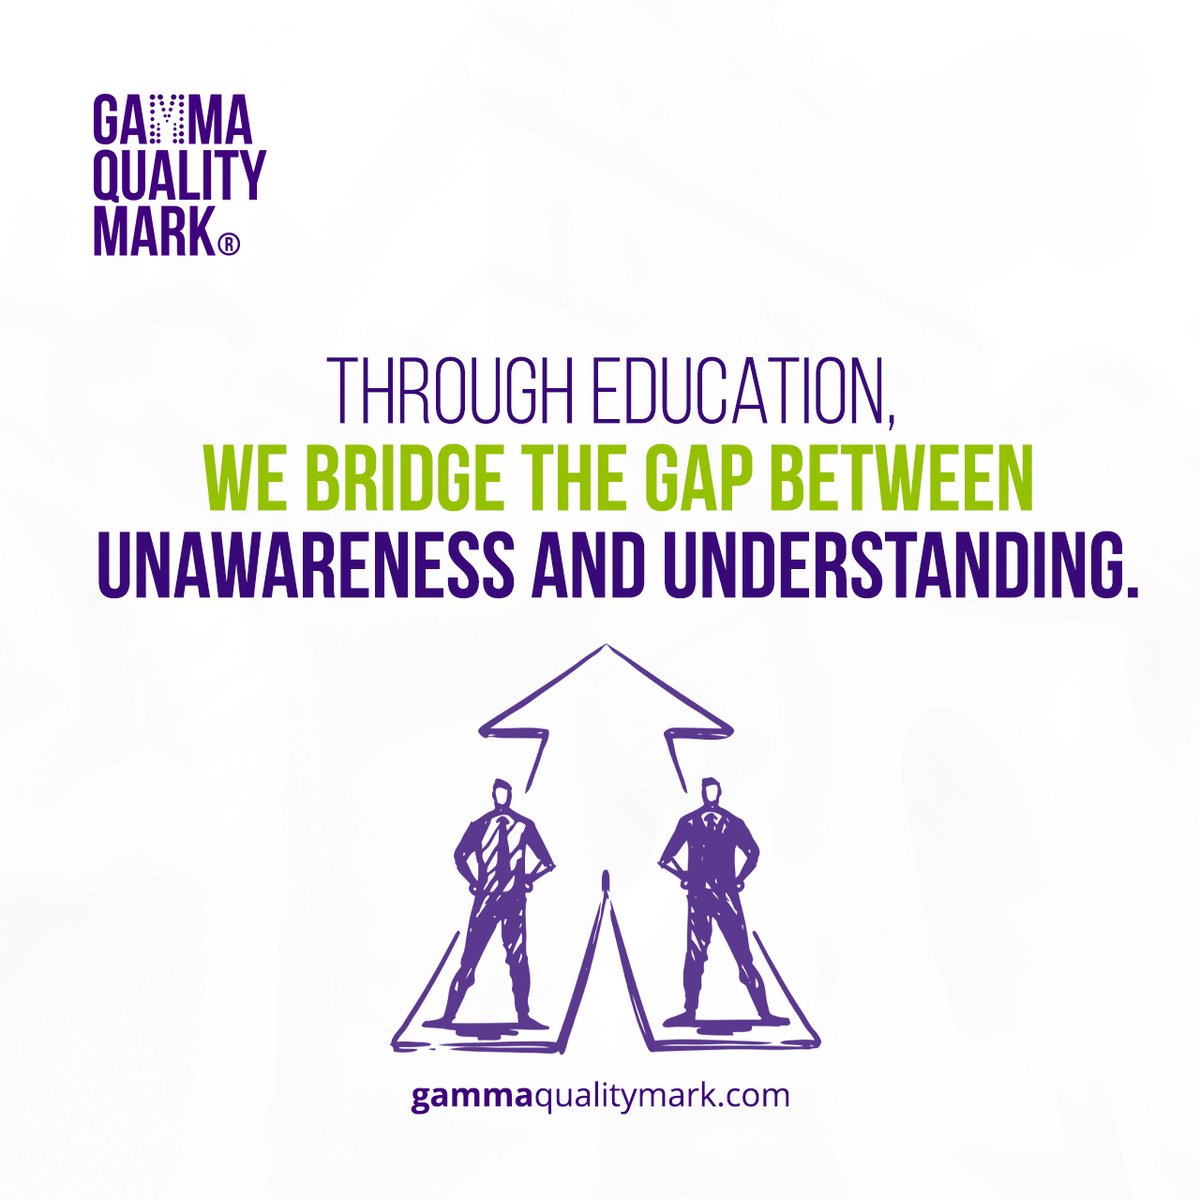 What we believe at Gamma Quality Mark gammaqualitymark.com

#EducationConsultancy #EducationalAdvisor #LearningSolutions #StudentSuccess #HigherEdConsulting #SchoolImprovement #EducationStrategy #AcademicConsulting #EduConsultant #EducationTrends